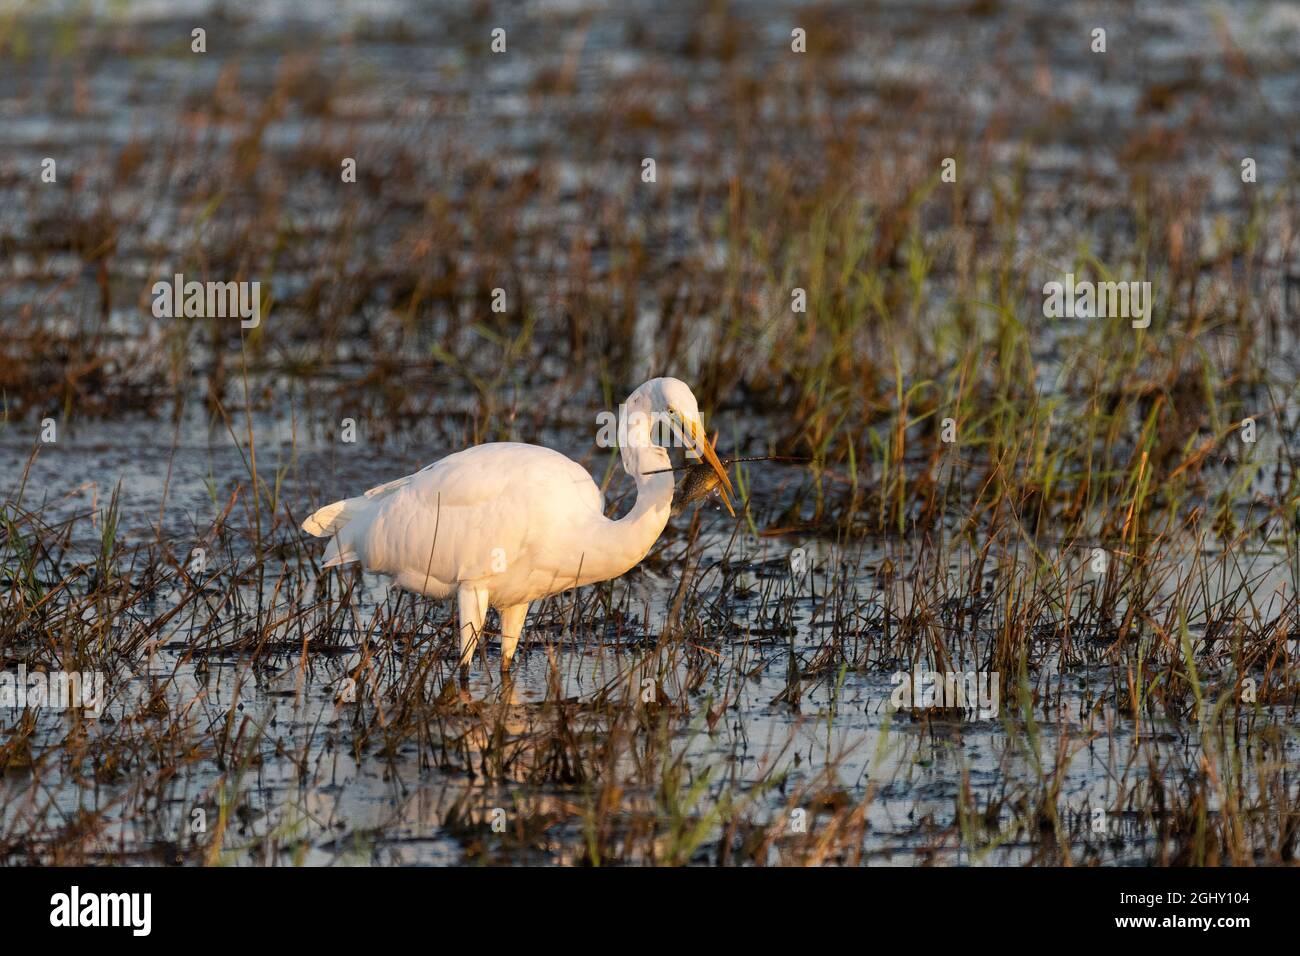 A Great White Egret standing in a grassy marsh with a fish in its beak that it caught to eat eating. Stock Photo